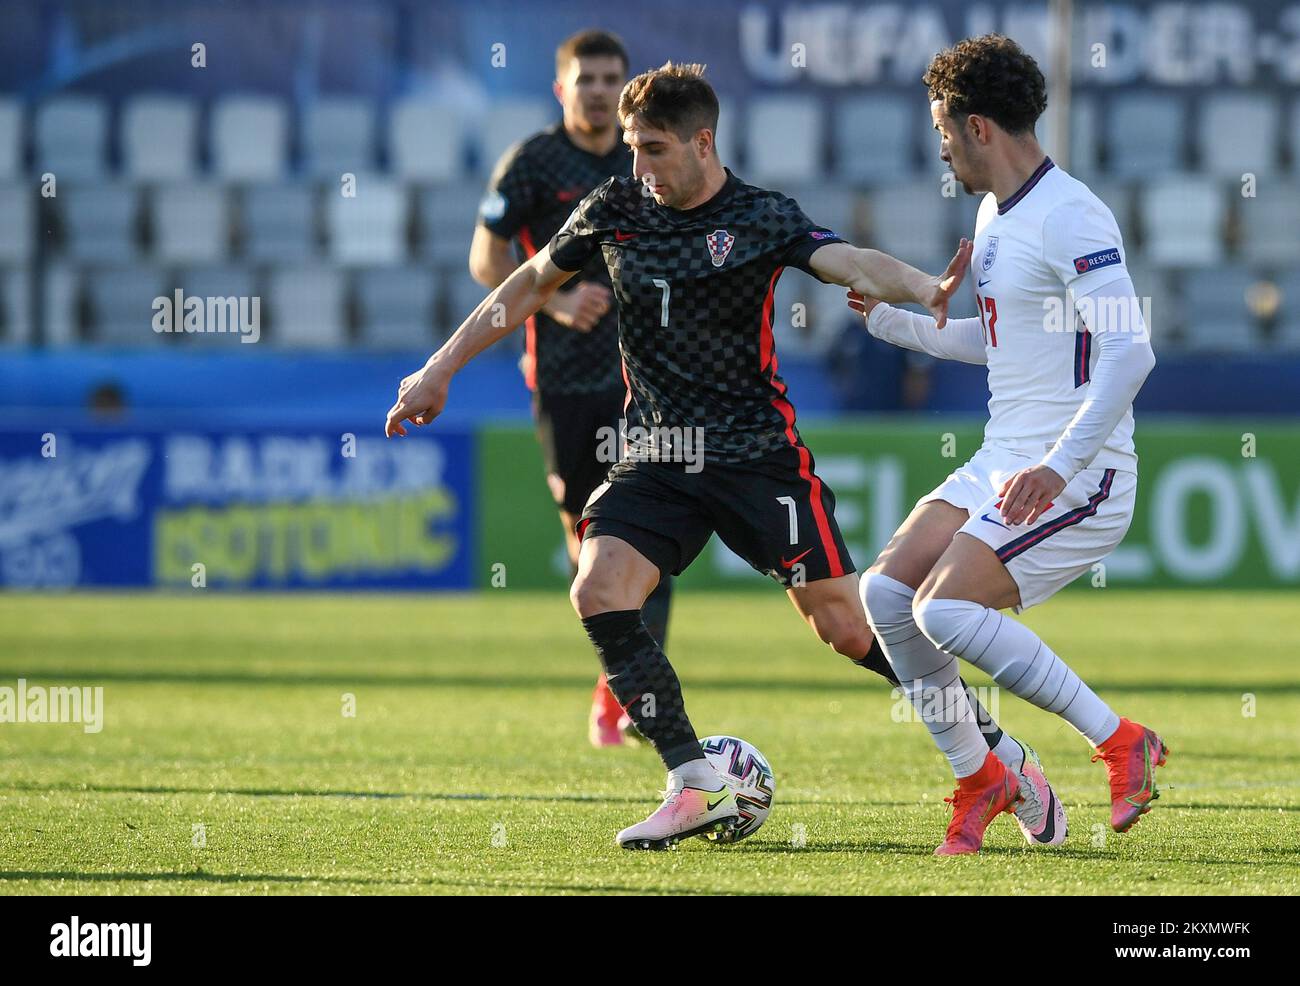 KOPER, SLOVENIA - MARCH 31: Luka Ivanusec of Croatia and Curtis Jones of England battle for the ball during the 2021 UEFA European Under-21 Championship Group D match between Croatia and England at Bonifika Stadium on March 31, 2021 in Koper, Slovenia. Photo: Marko Lukunic/PIXSELL Stock Photo